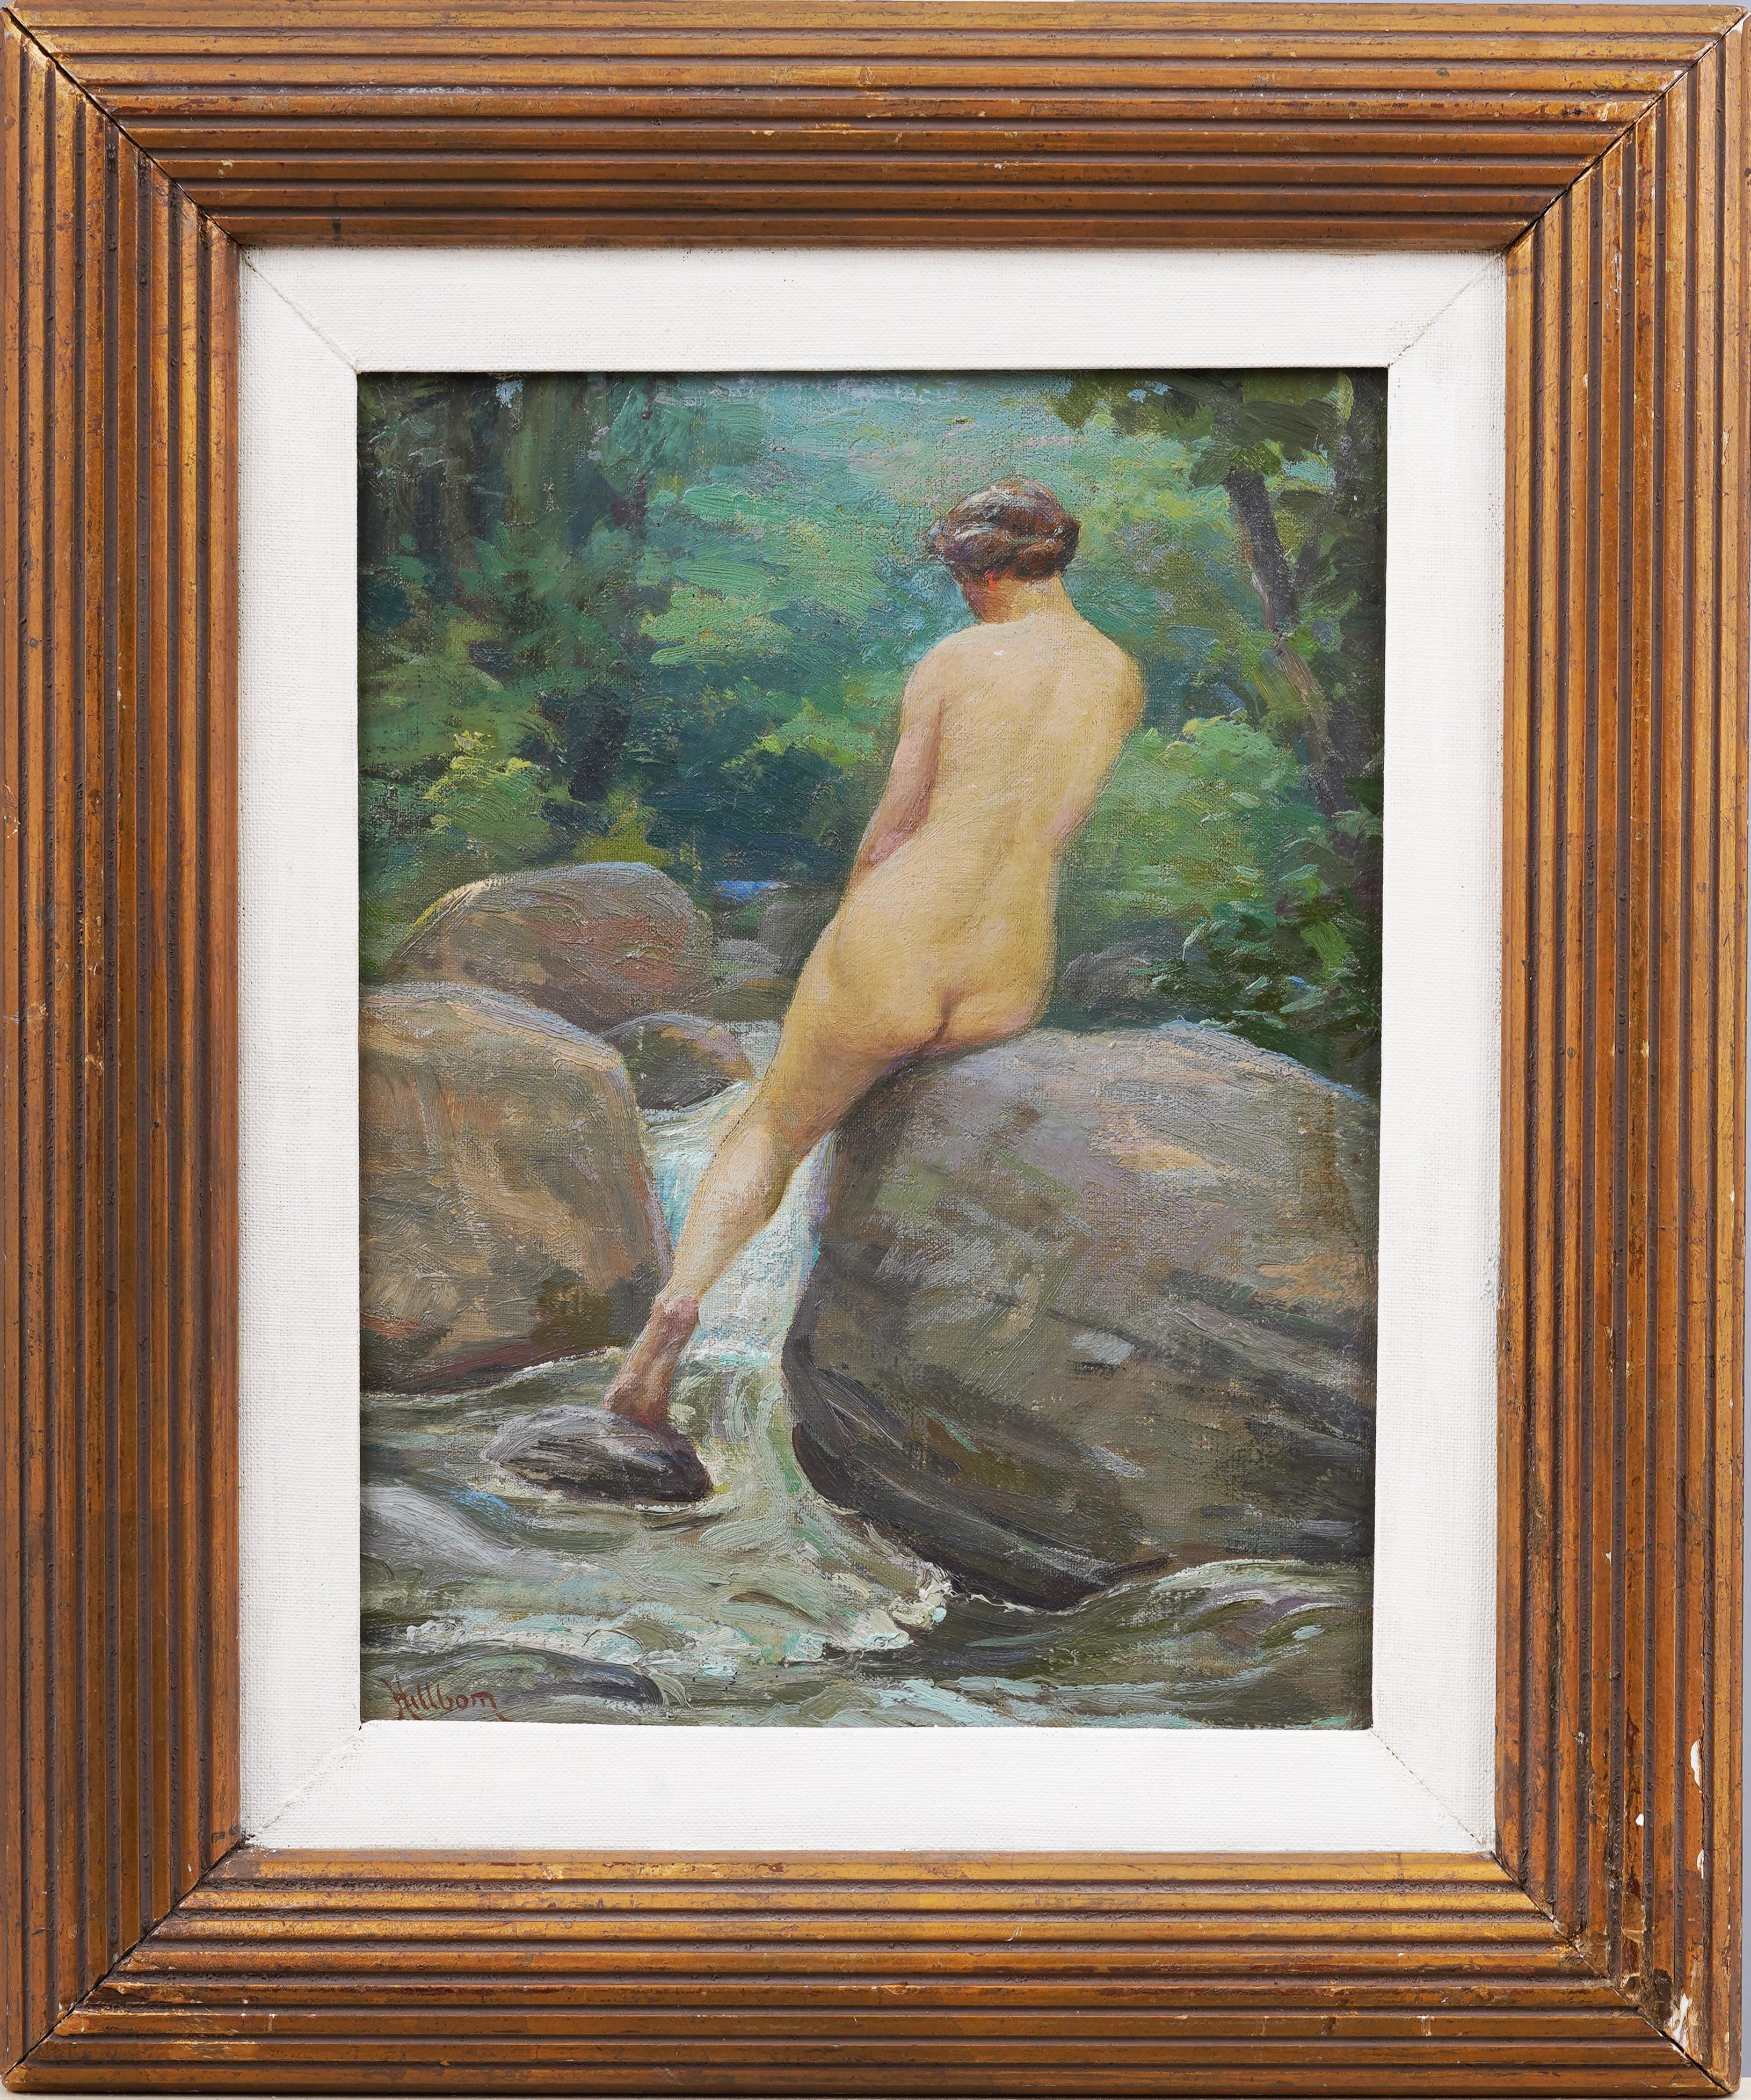 Henrik Hillblom  Nude Painting - Antique American Impressionist Nude by Stream Exhibited Framed Oil Painting